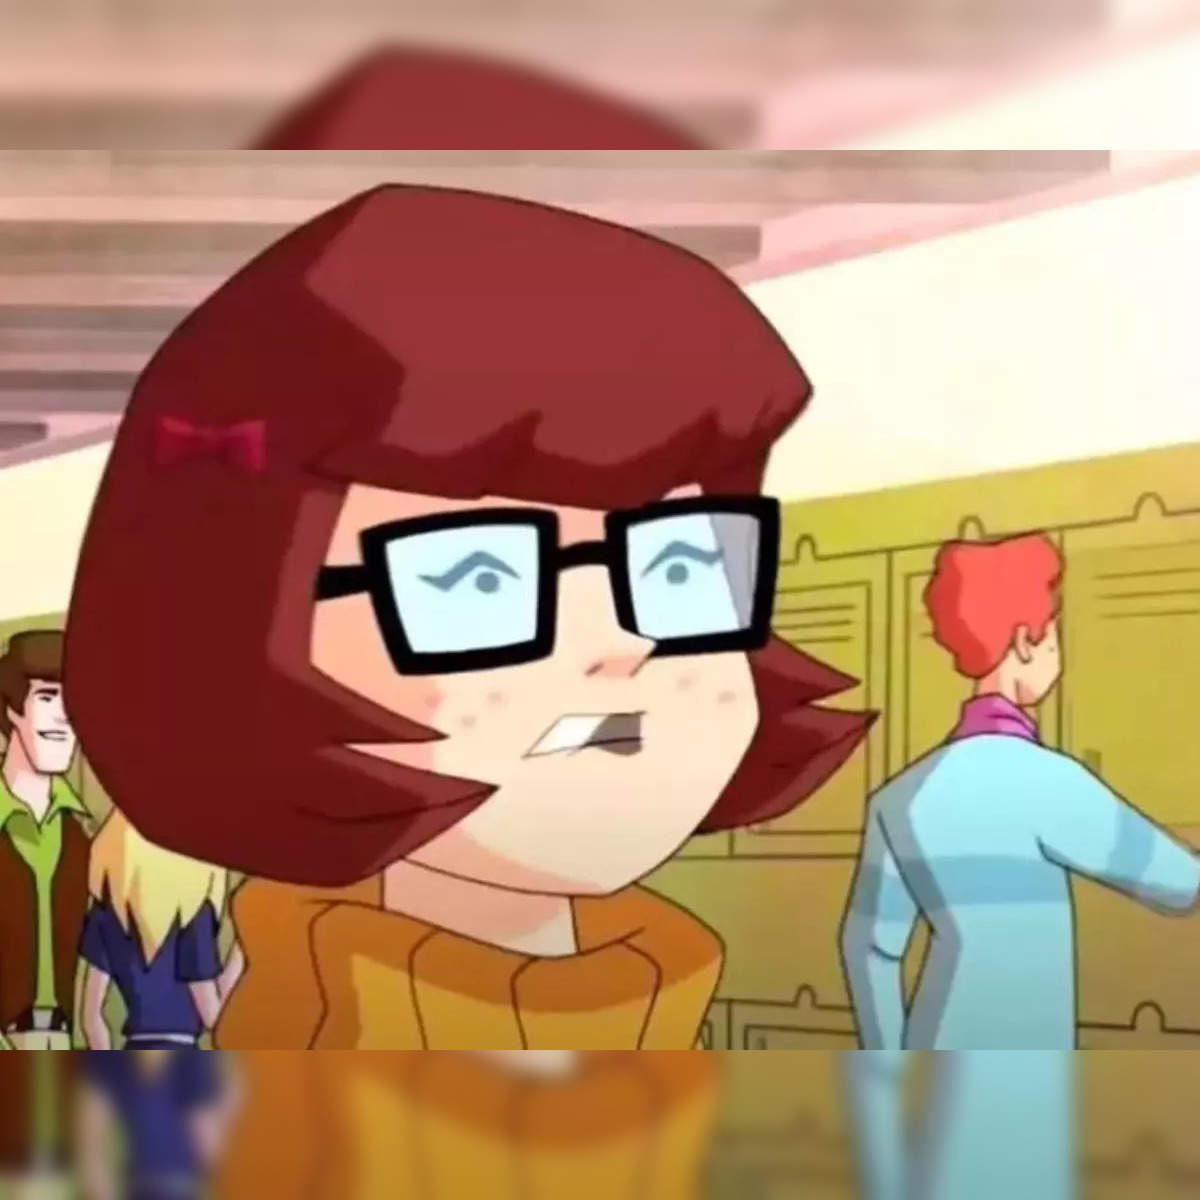 velma: After decades, Velma Dinkley is out of the closet! New 'Scooby-Doo'  movie depicts her as lesbian - The Economic Times